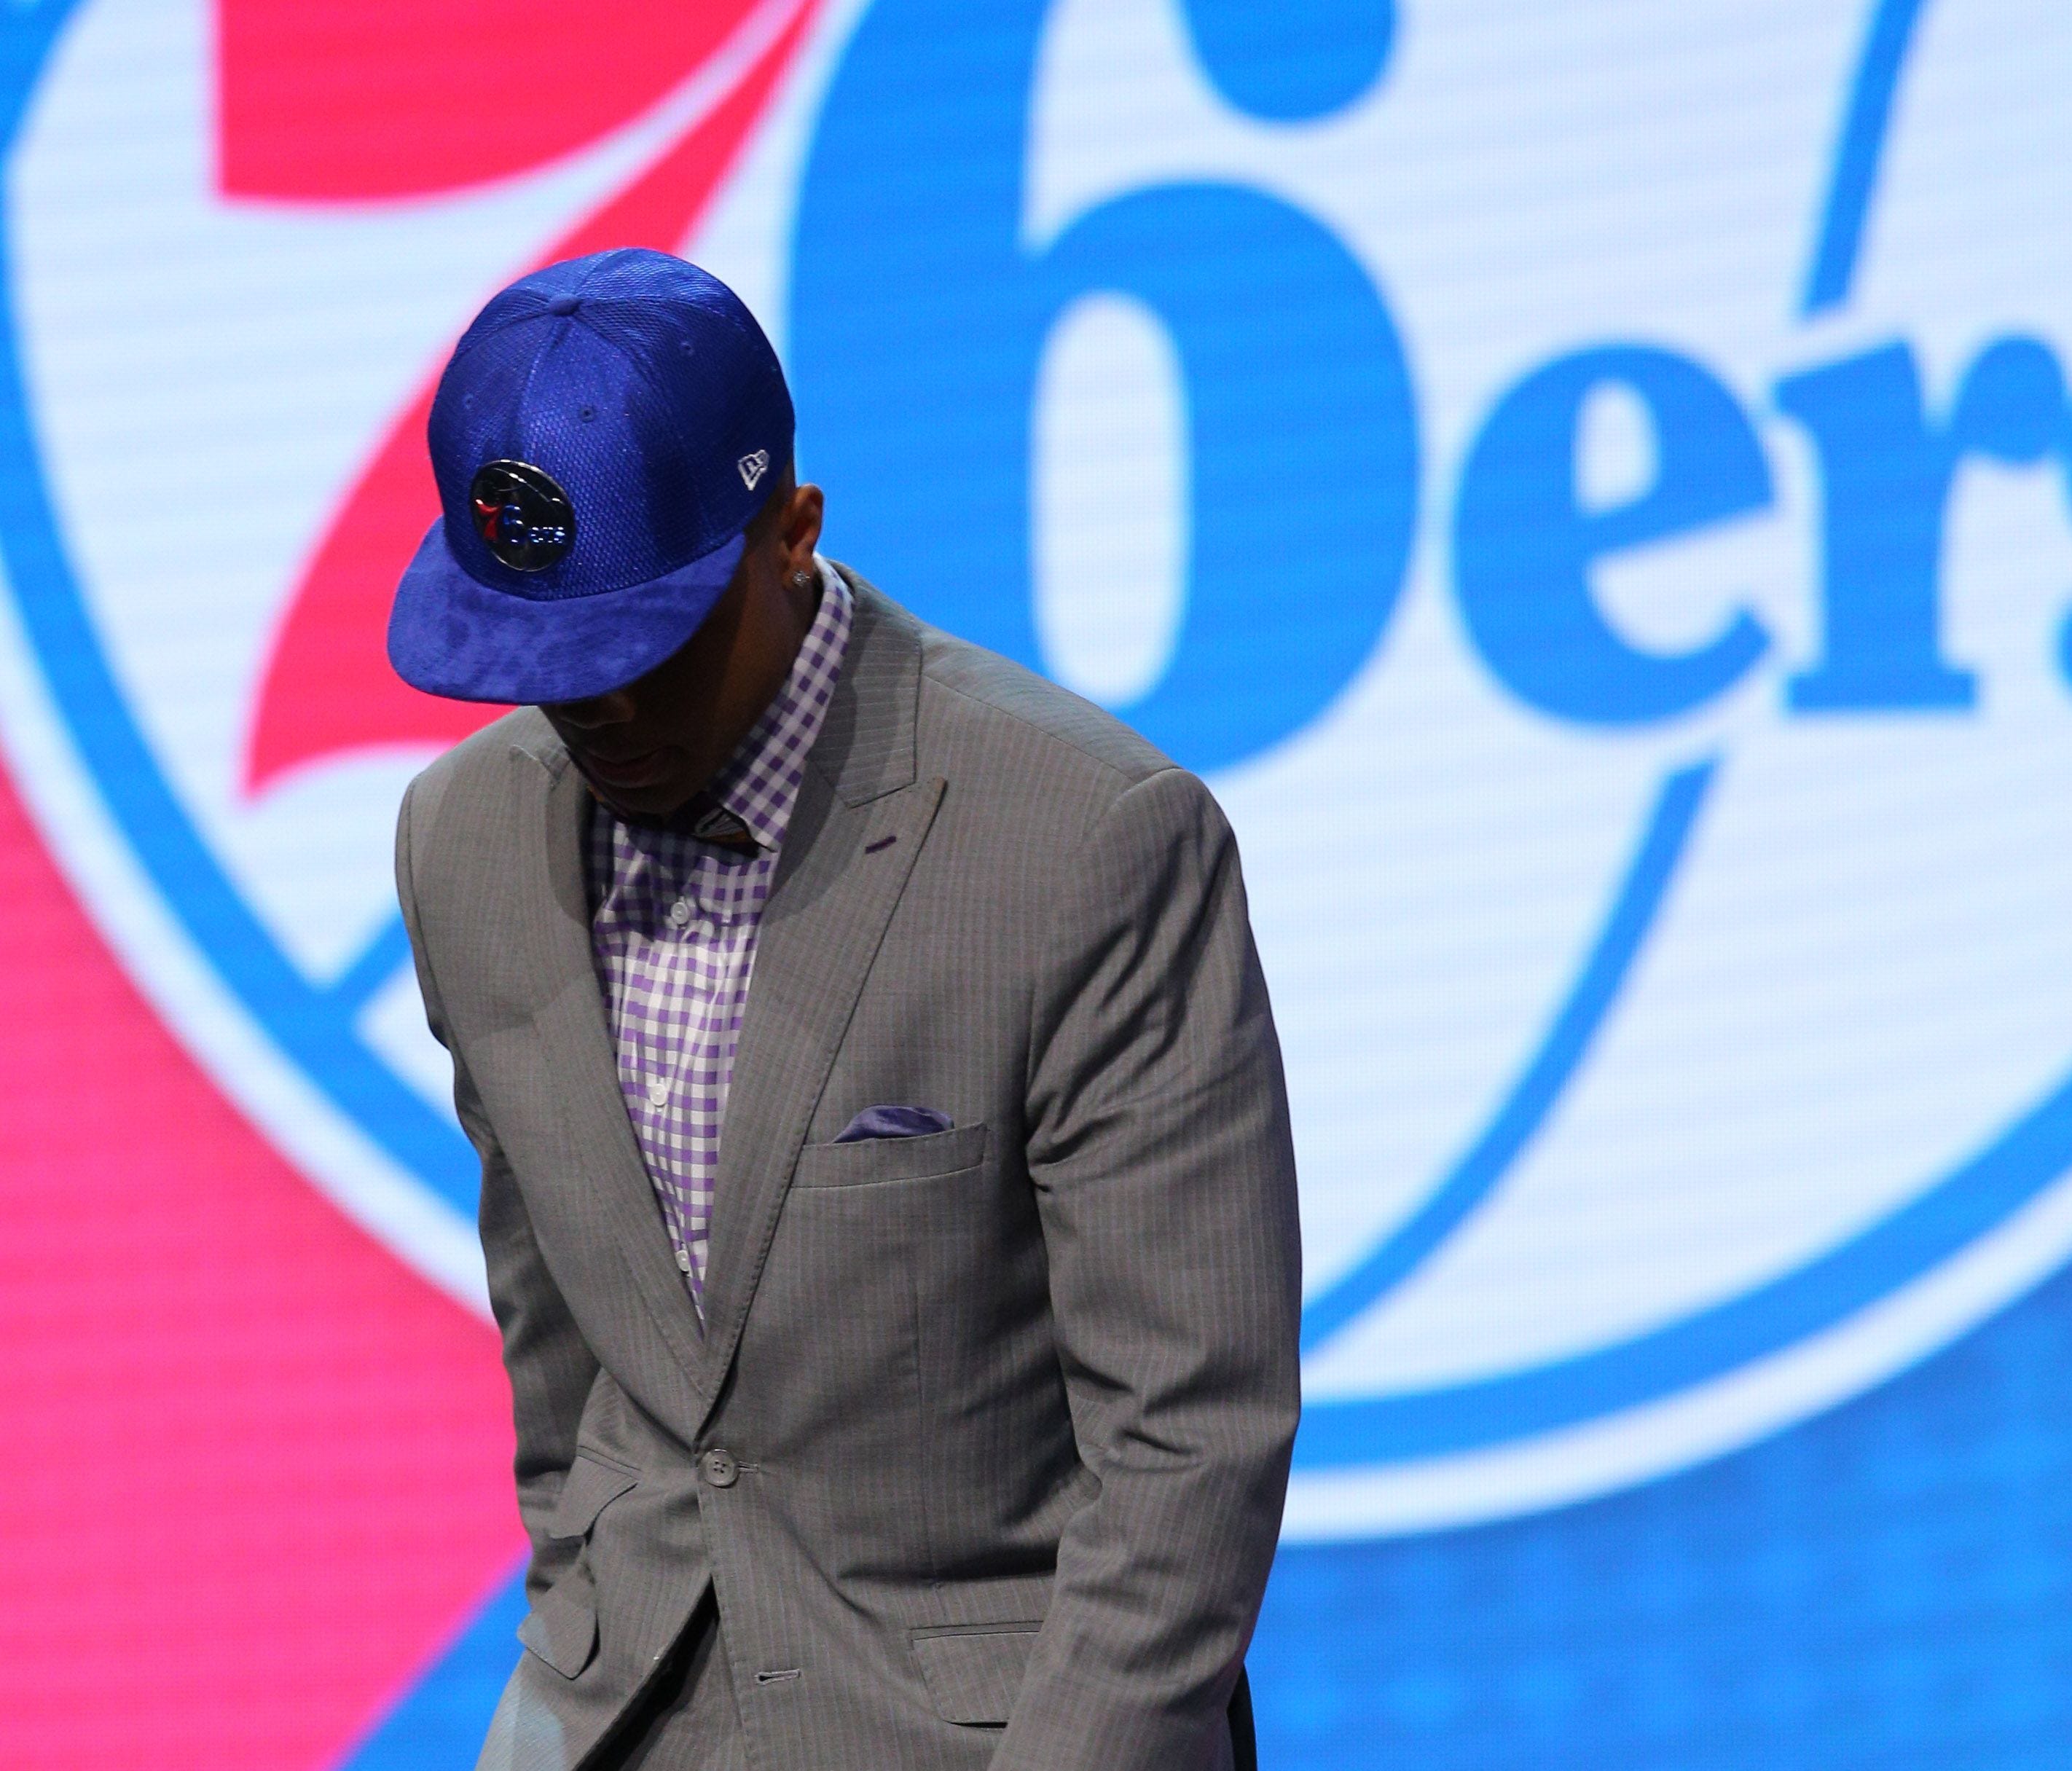 Jun 22, 2017; Brooklyn, NY, USA; Markelle Fultz (Washington) walks off stage after being introduced as the number one overall pick to the Philadelphia 76ers in the first round of the 2017 NBA Draft at Barclays Center. Mandatory Credit: Brad Penner-US